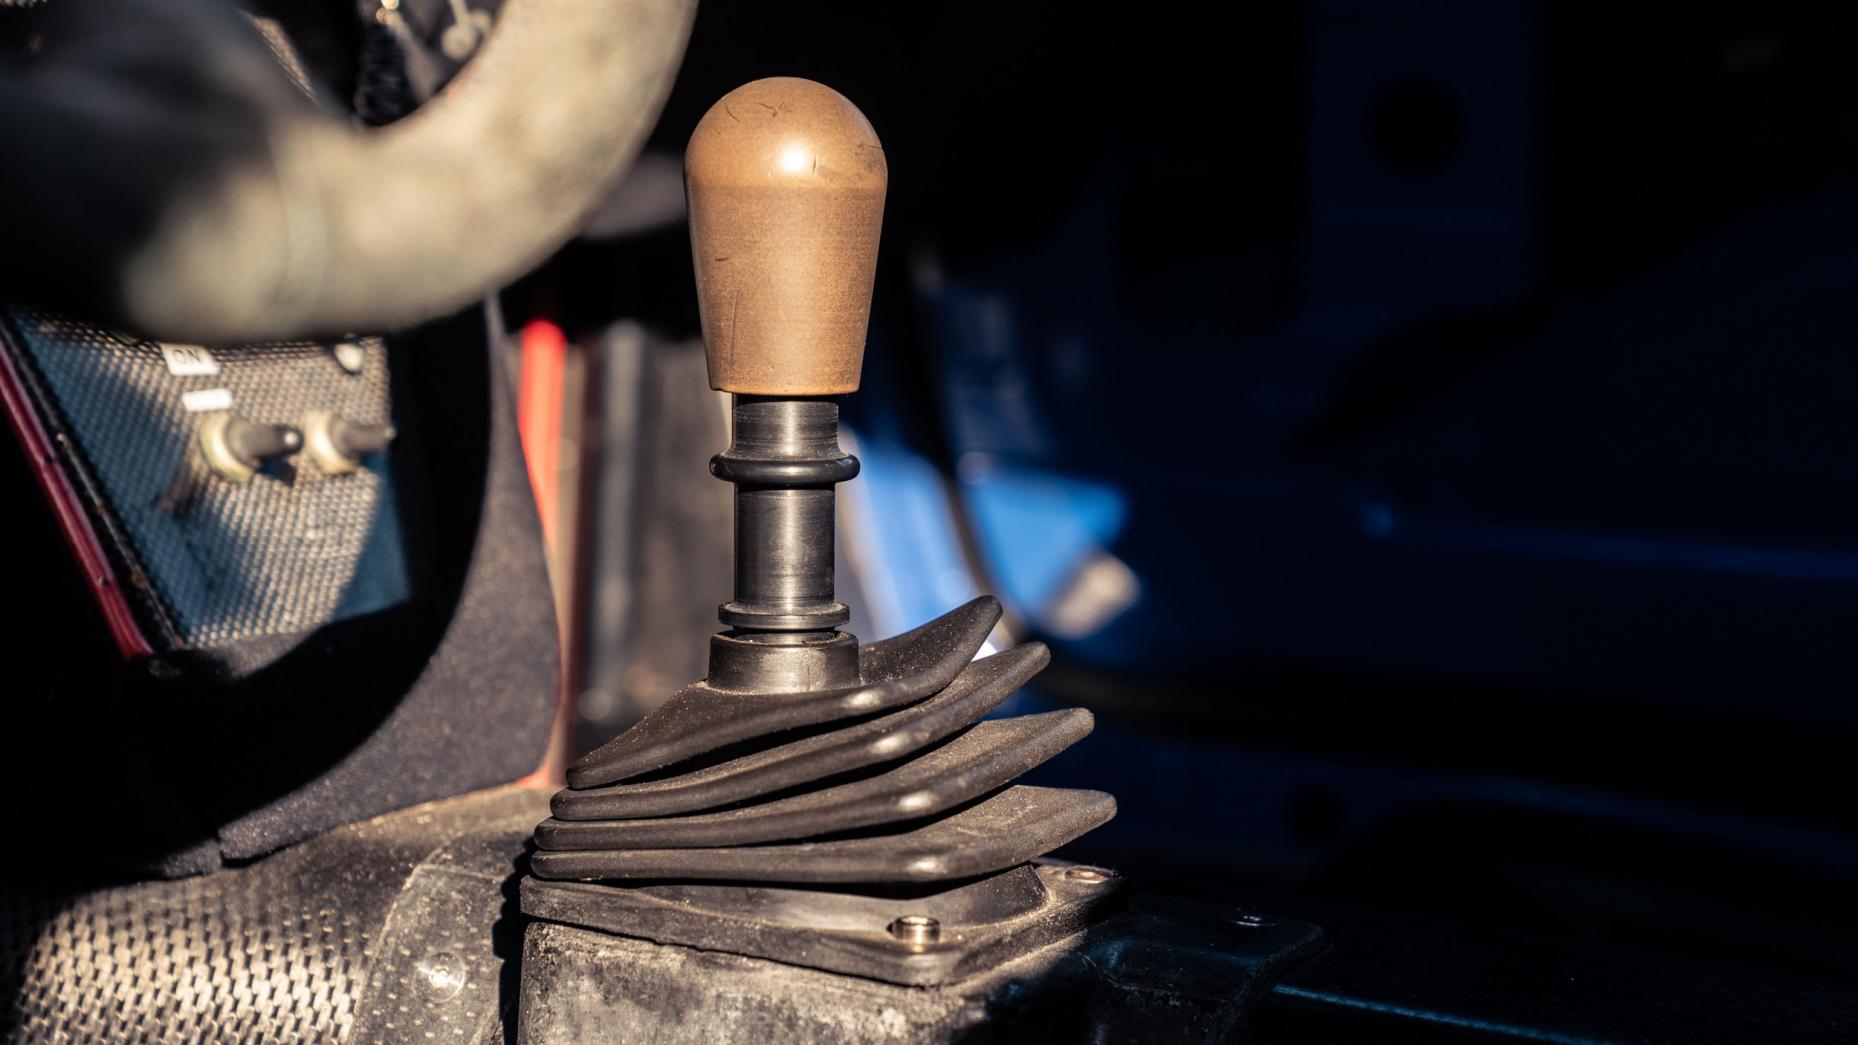 Yes, a manual gearbox